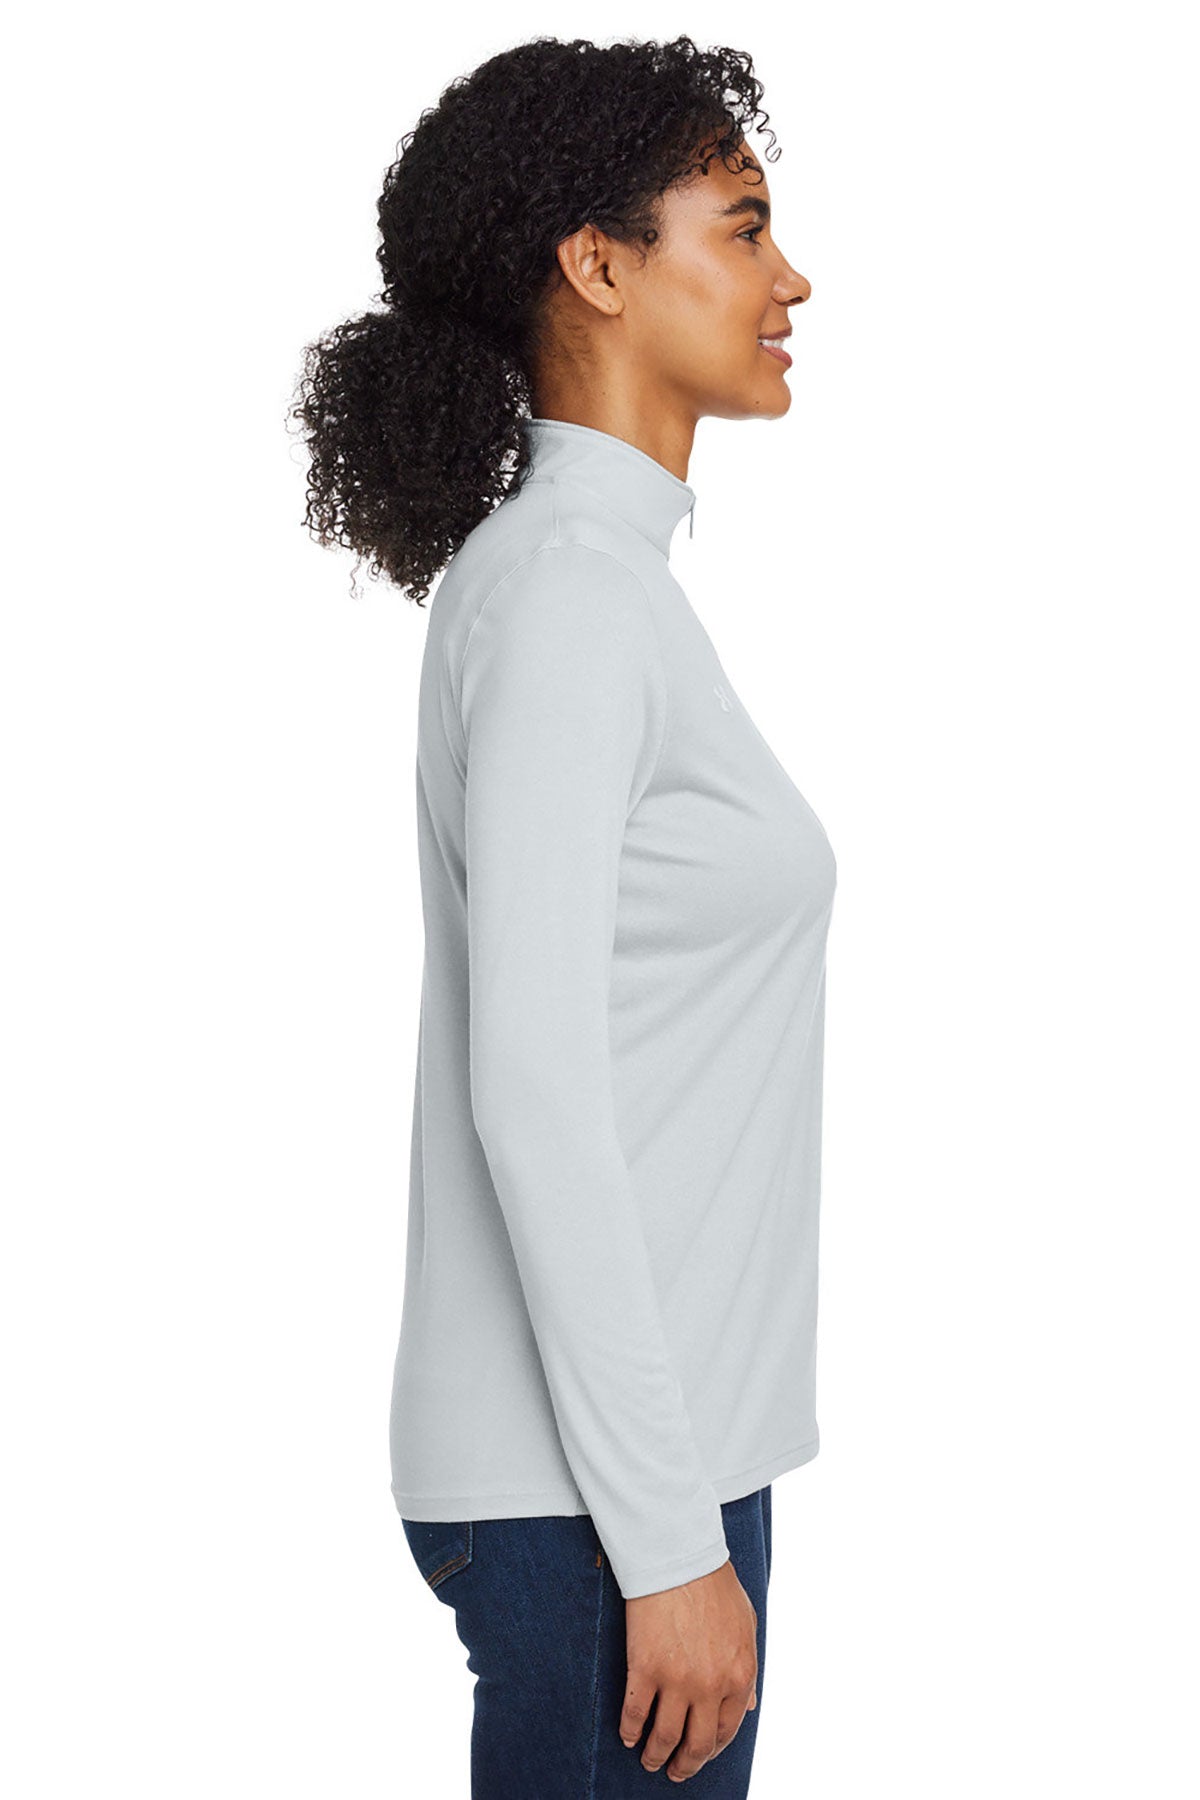 Under Armour Ladies Tech  Quarter-Zip, Mod Grey [GuidePoint Security]